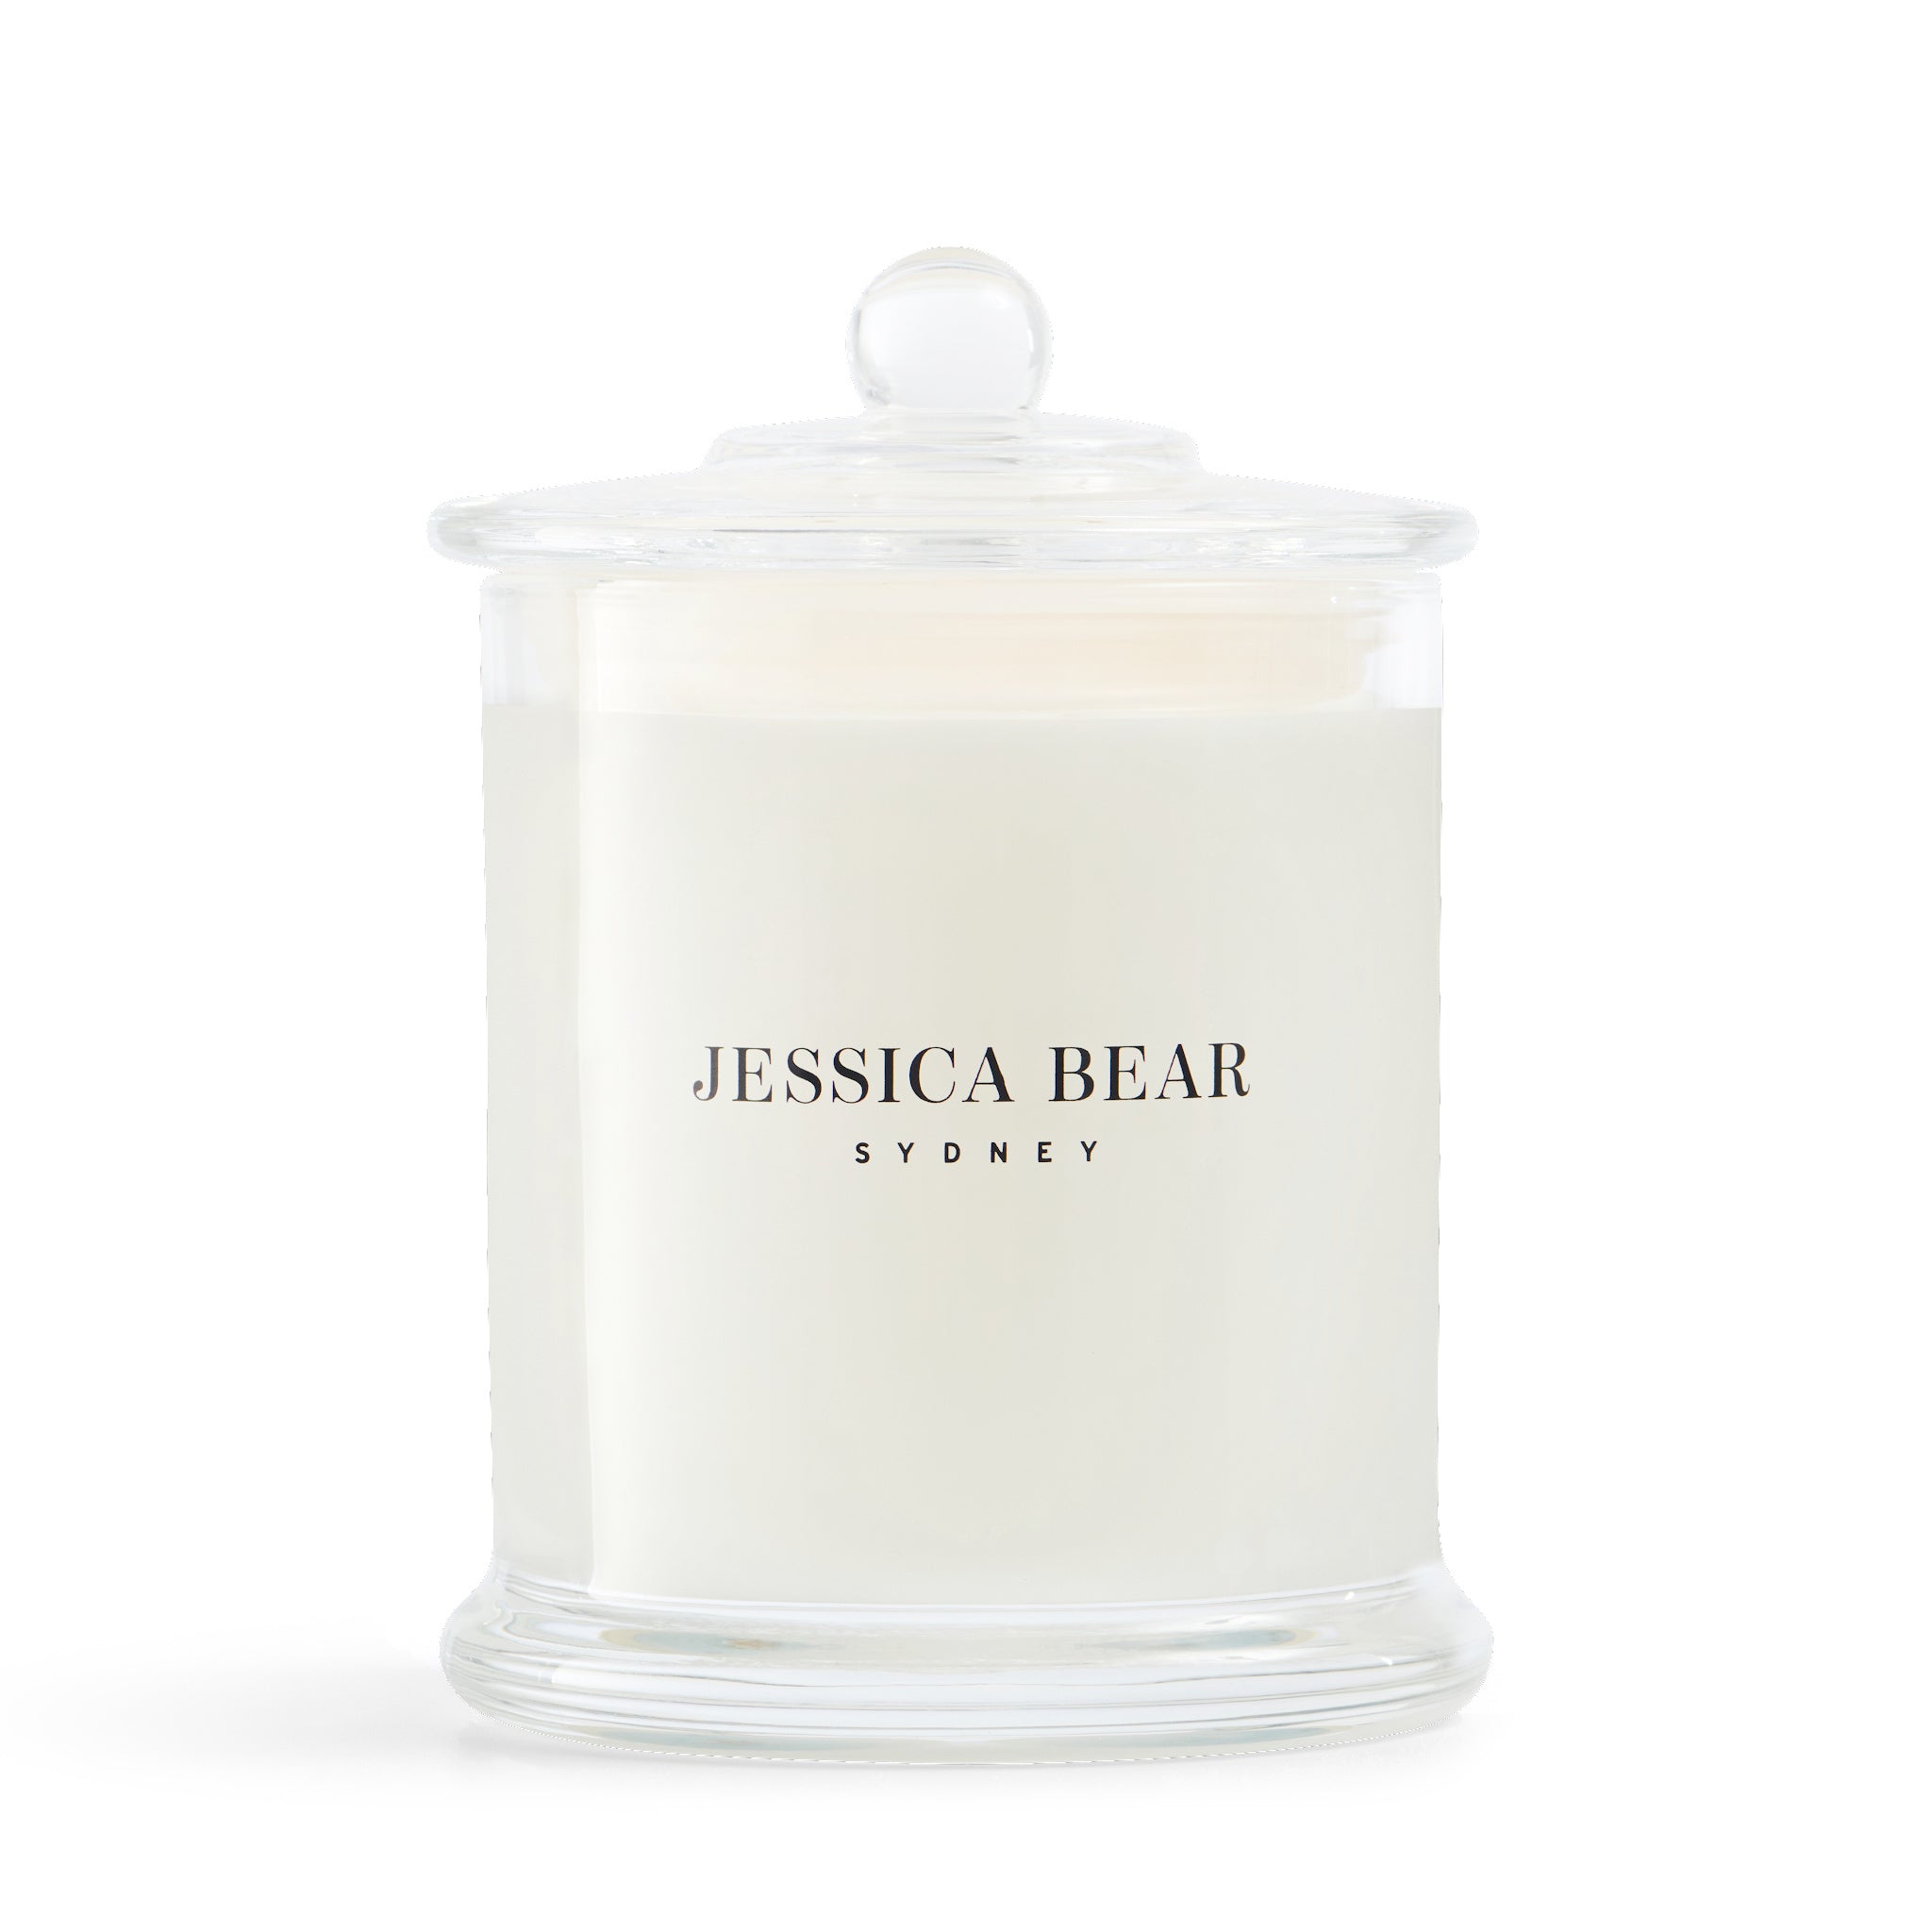 Amazon - 380g Scented Candle